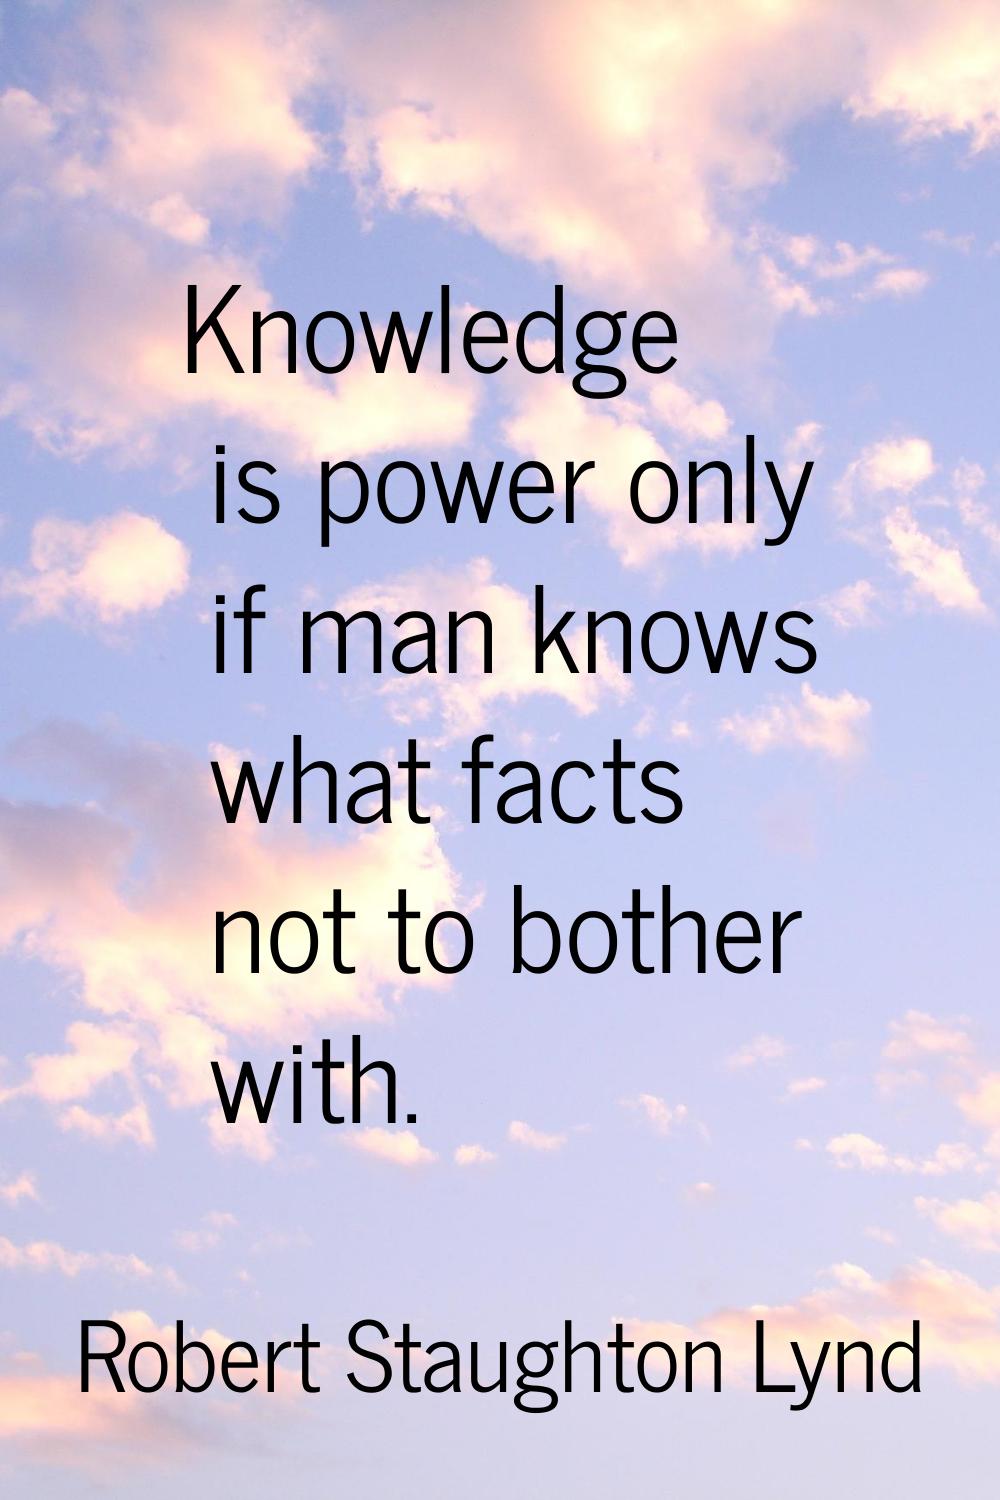 Knowledge is power only if man knows what facts not to bother with.